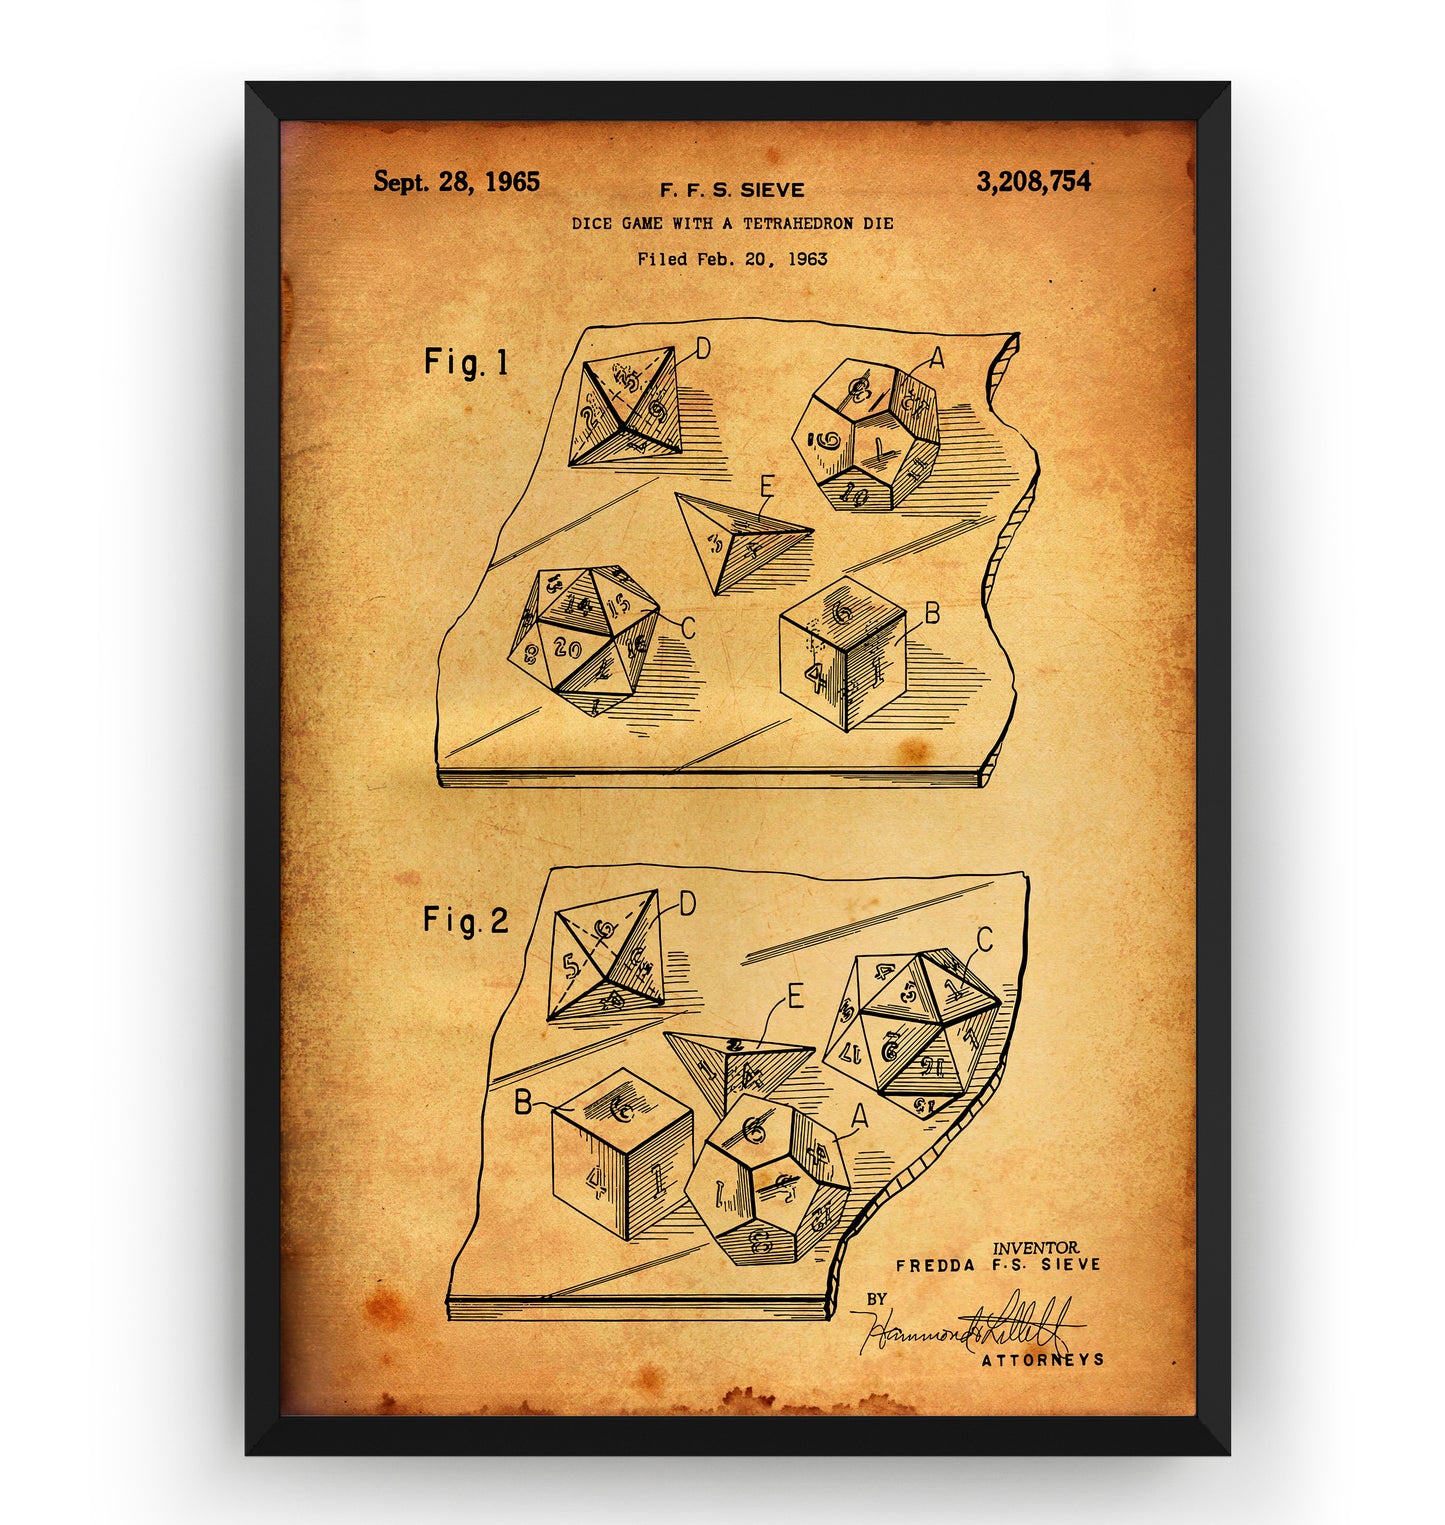 Dice Game With A Tetrahedron Dice 1963 Patent Print - Magic Posters